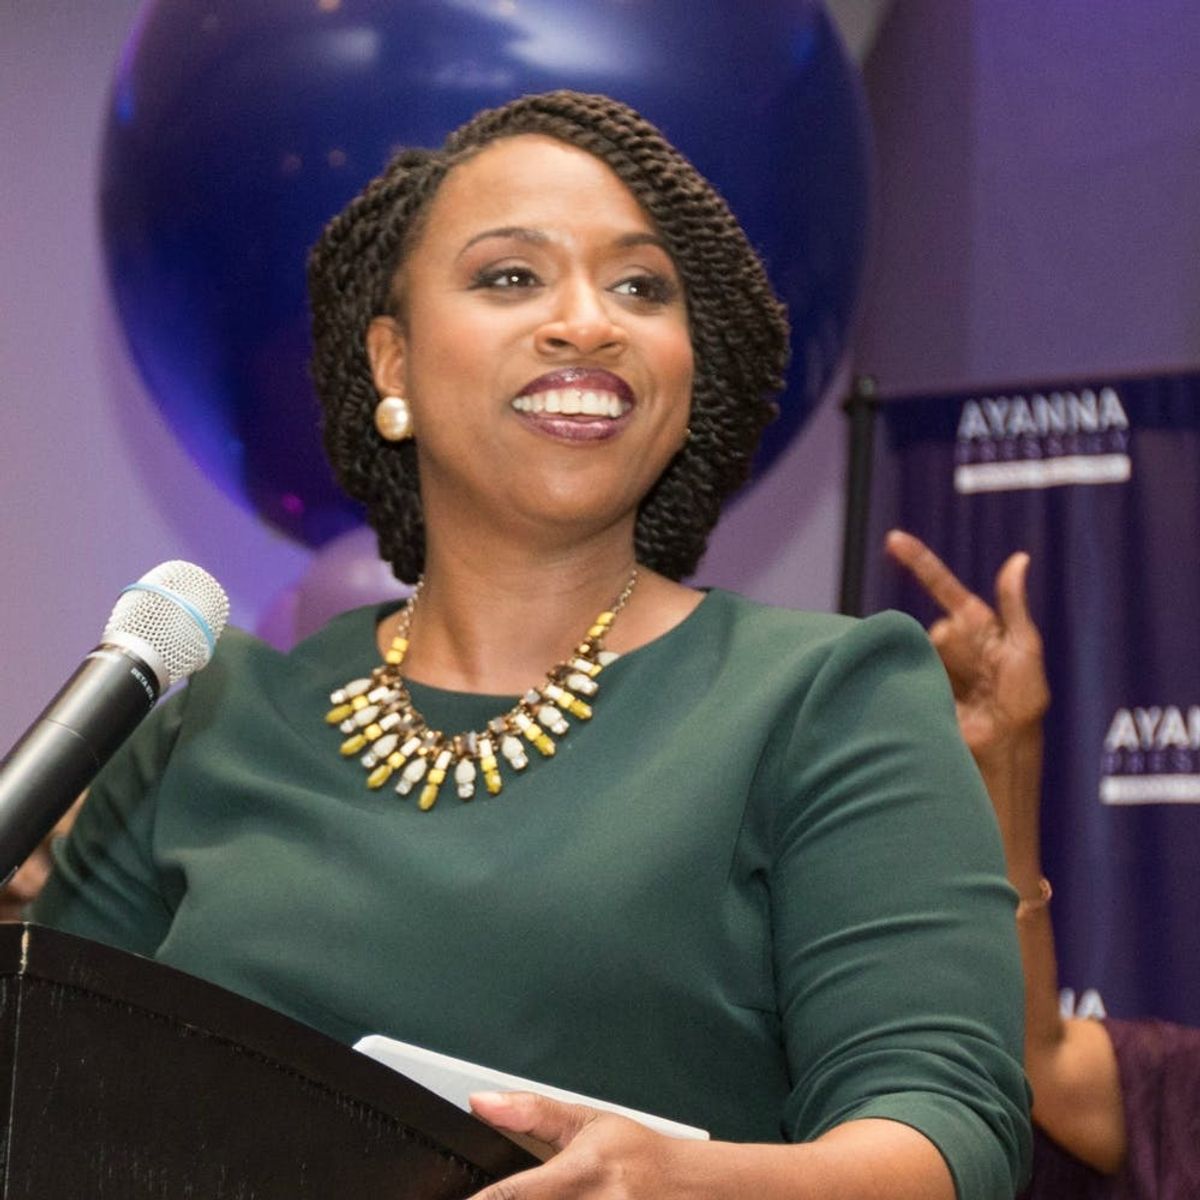 Ayanna Pressley’s Massachusetts Primary Win Hints at an Exciting 2018 Election Trend